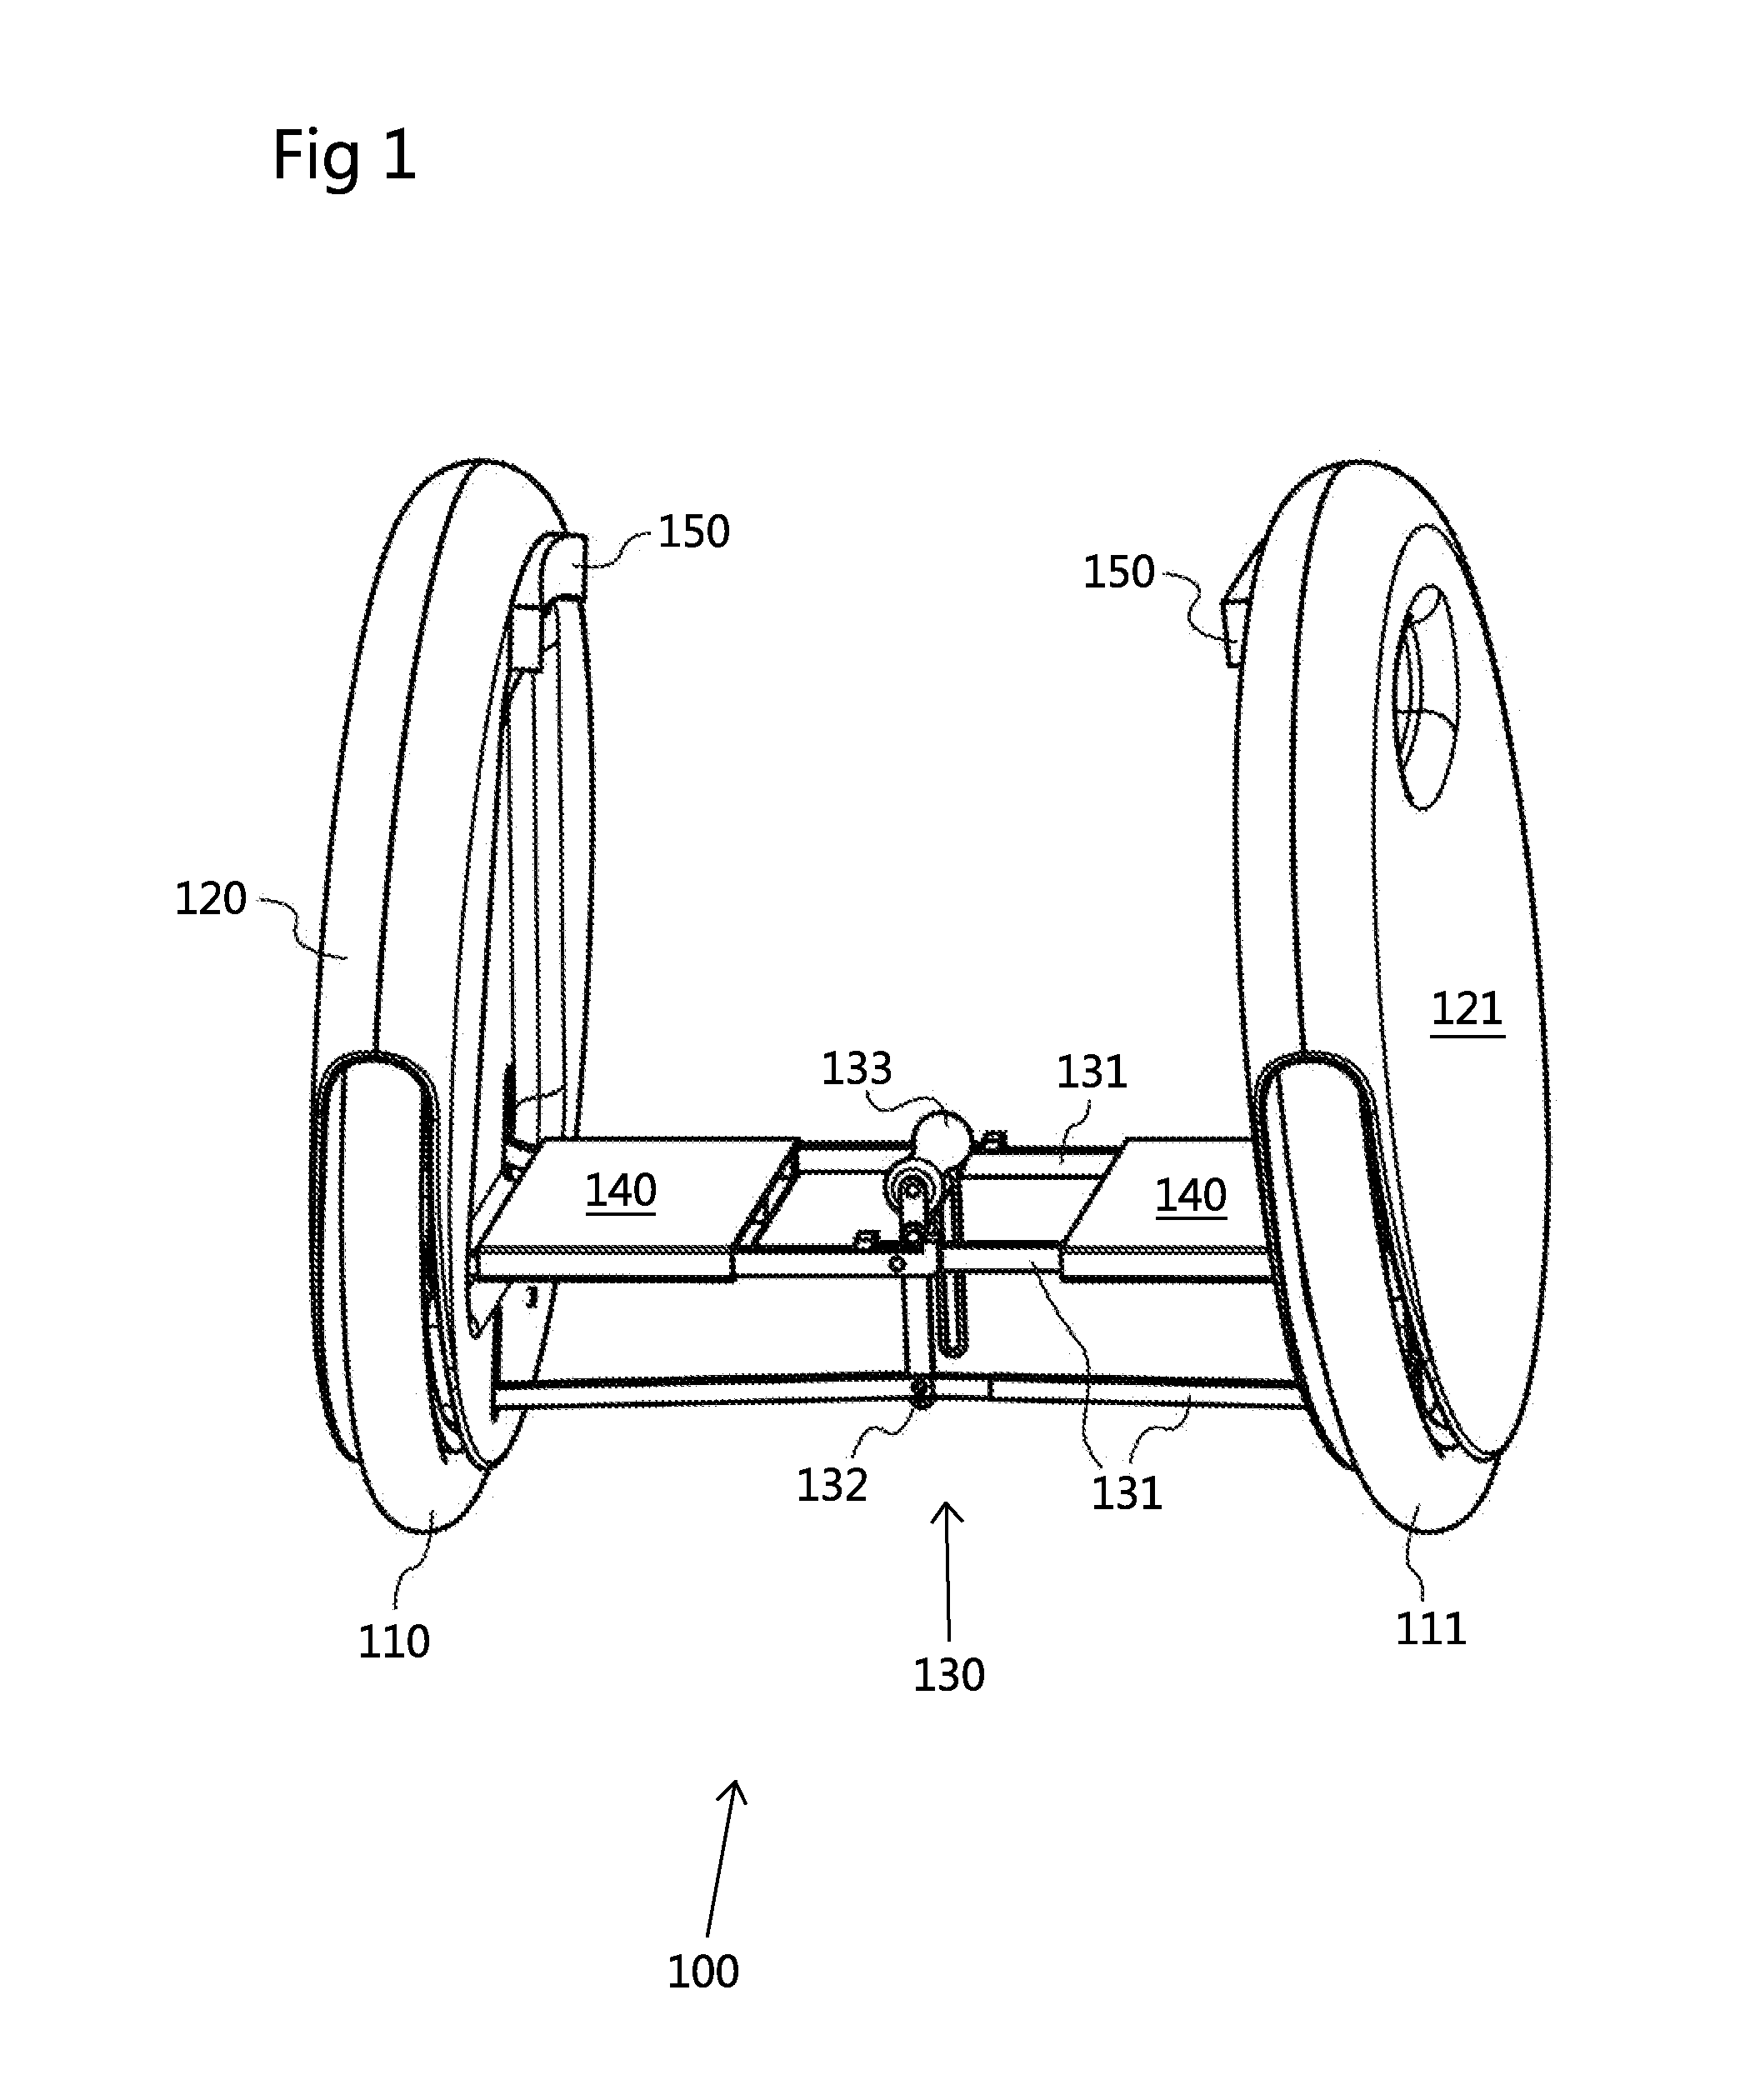 Two-wheeled self-balancing motorized personal vehicle with tilting wheels